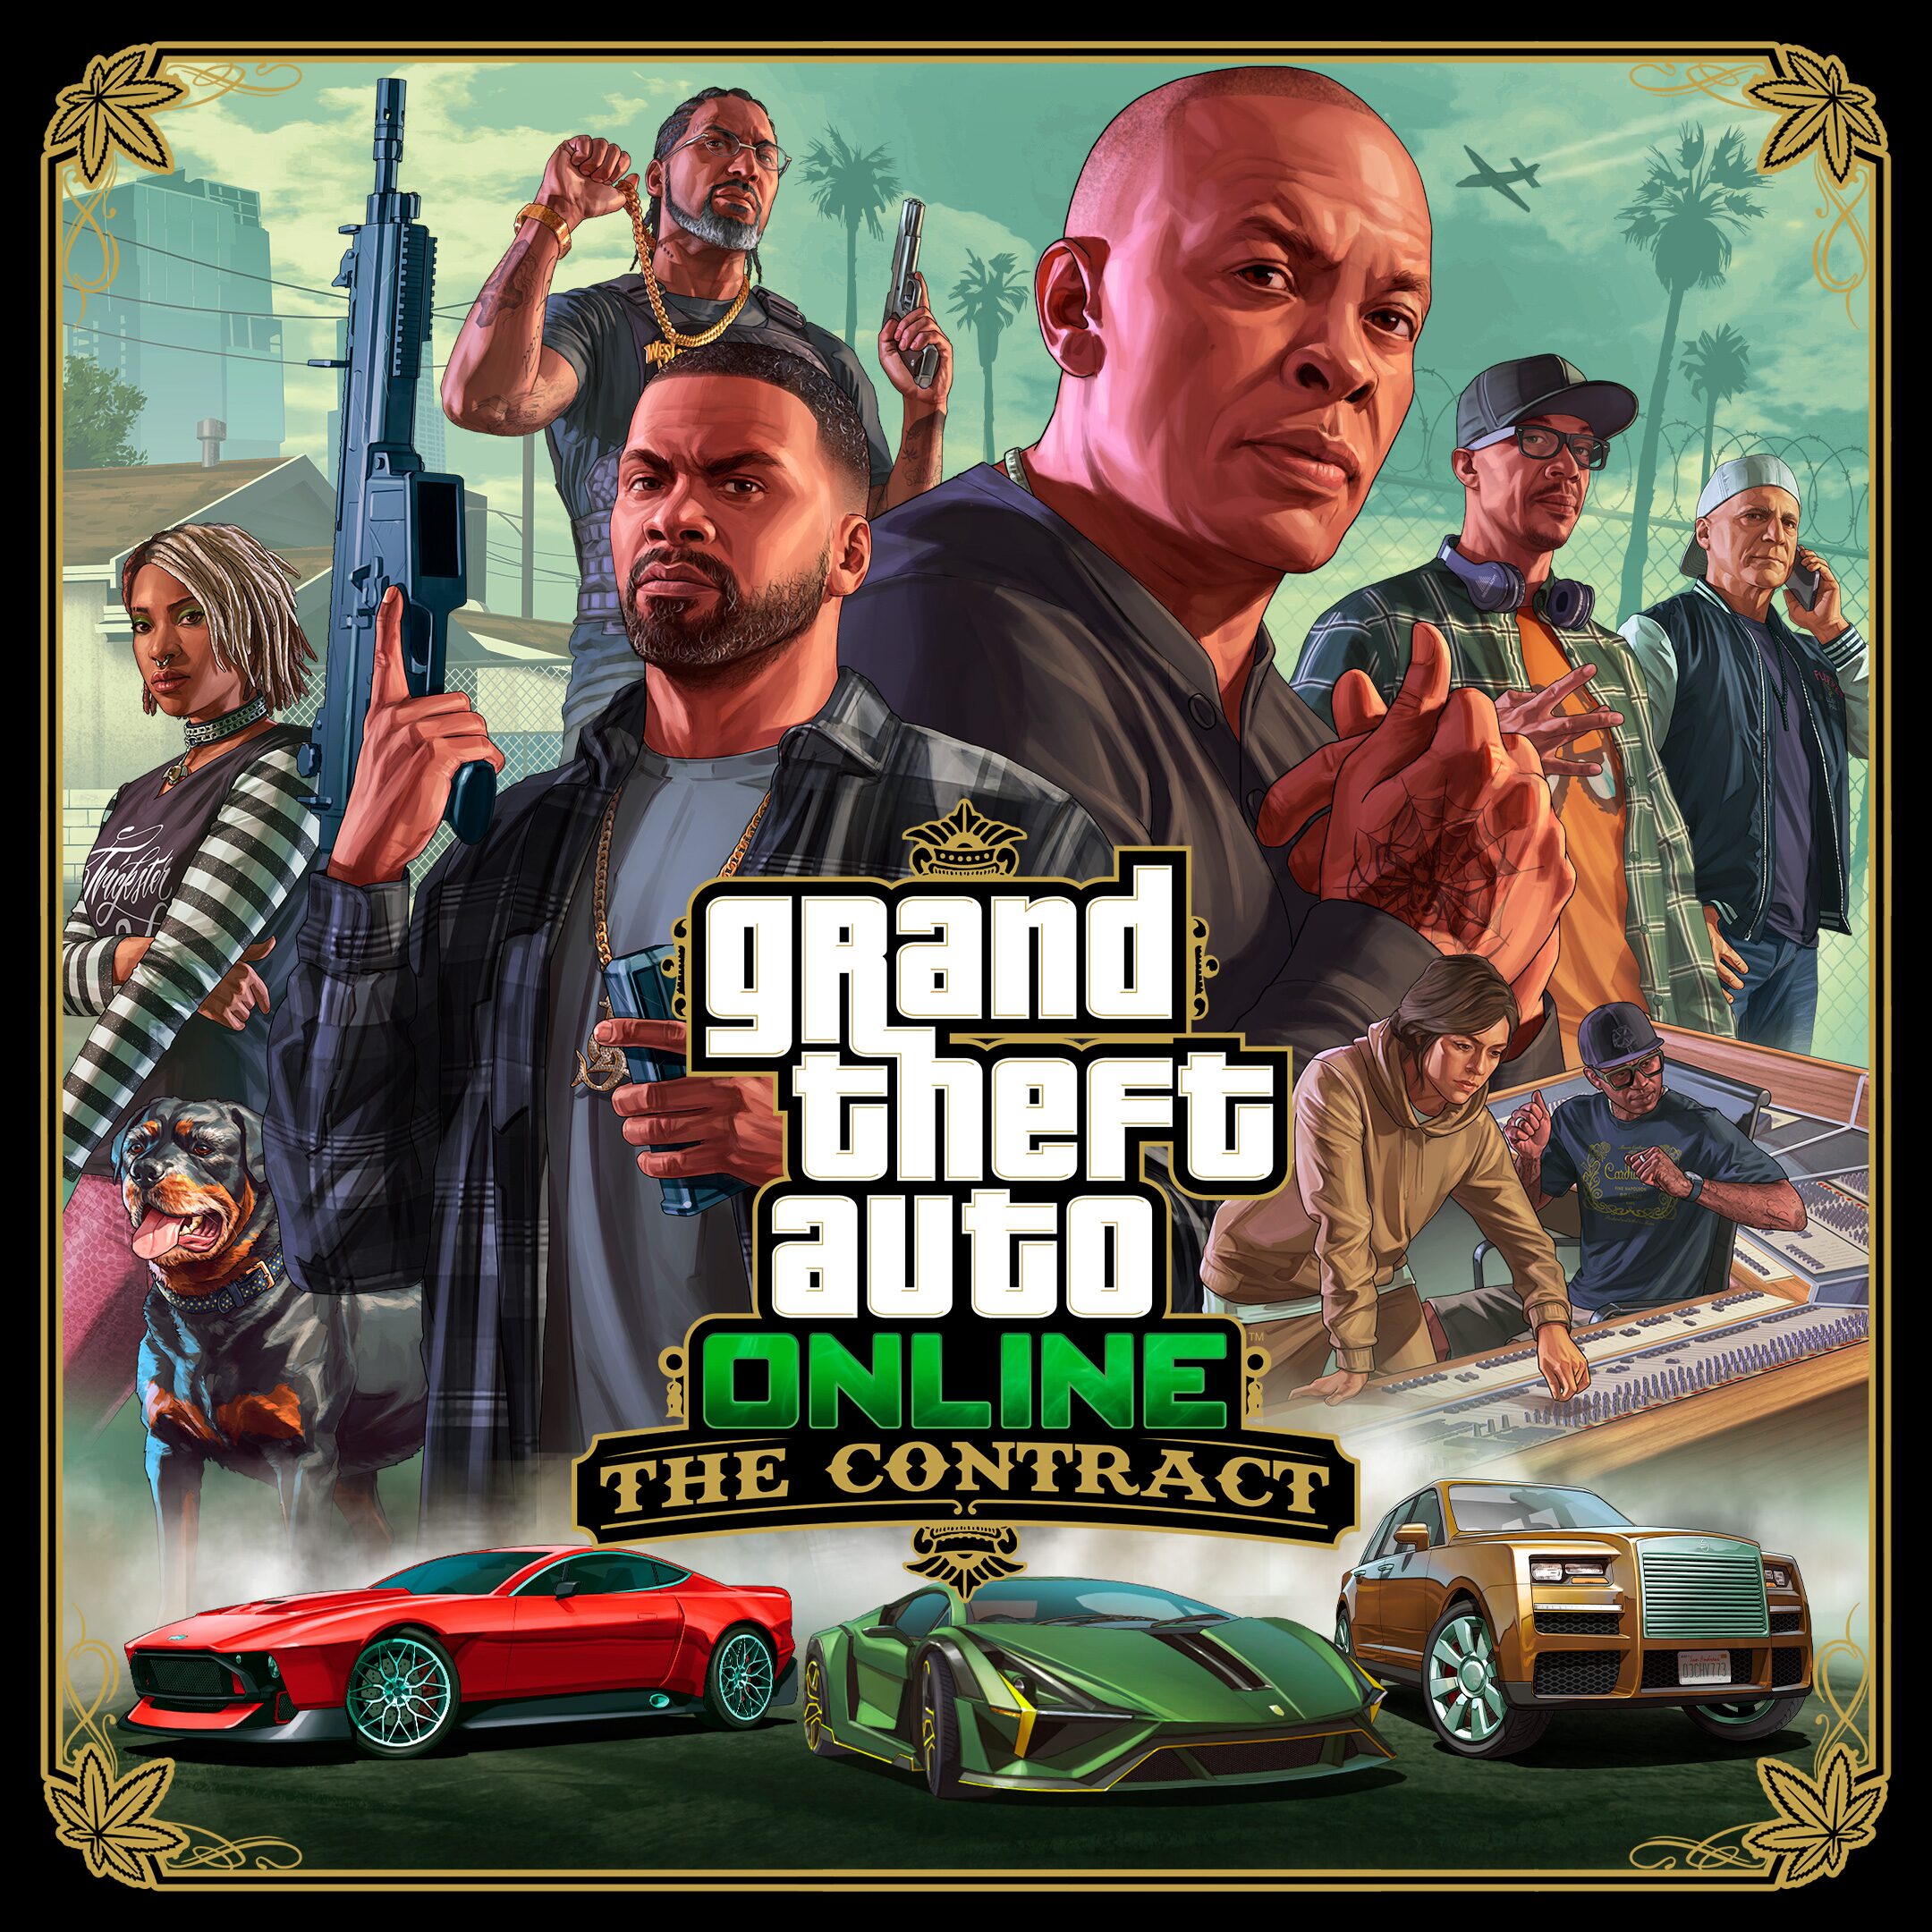 GTA Online - "The Contract"